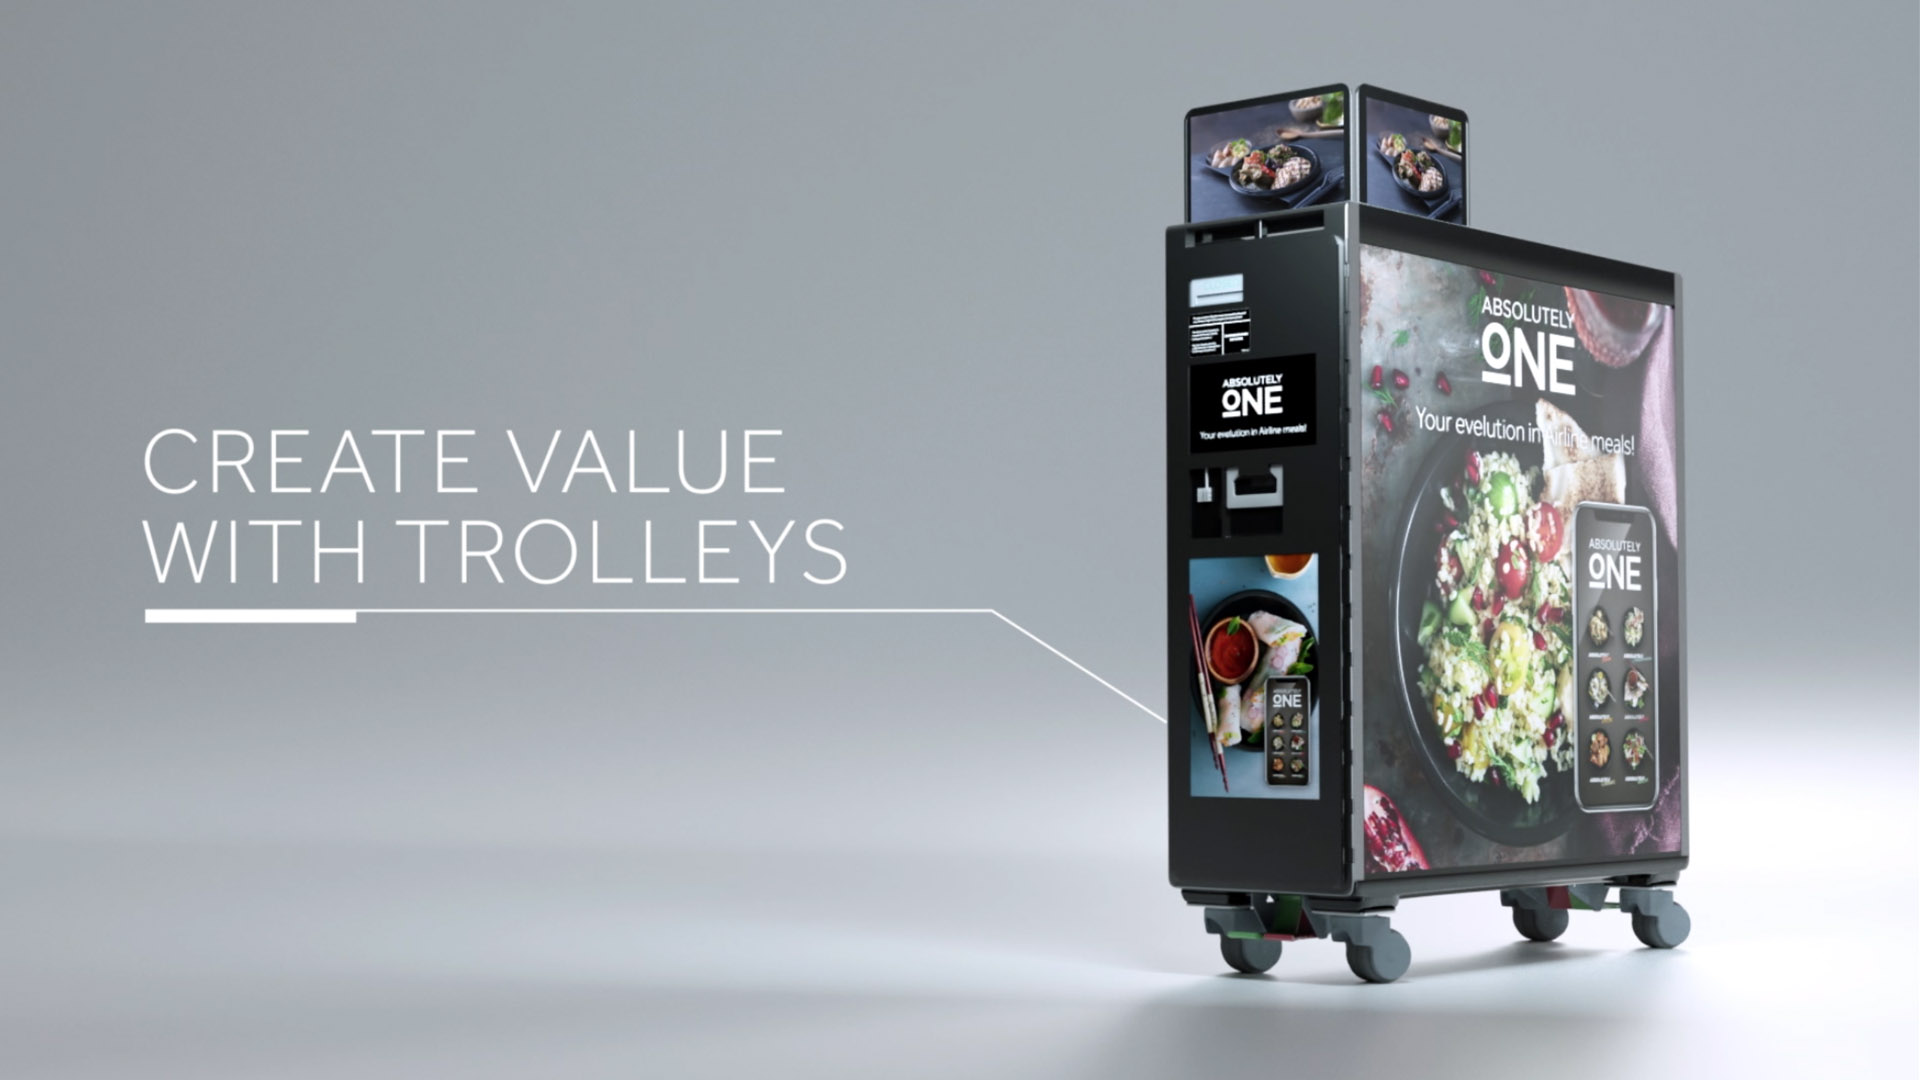 Creating value with trolleys / Gategroup